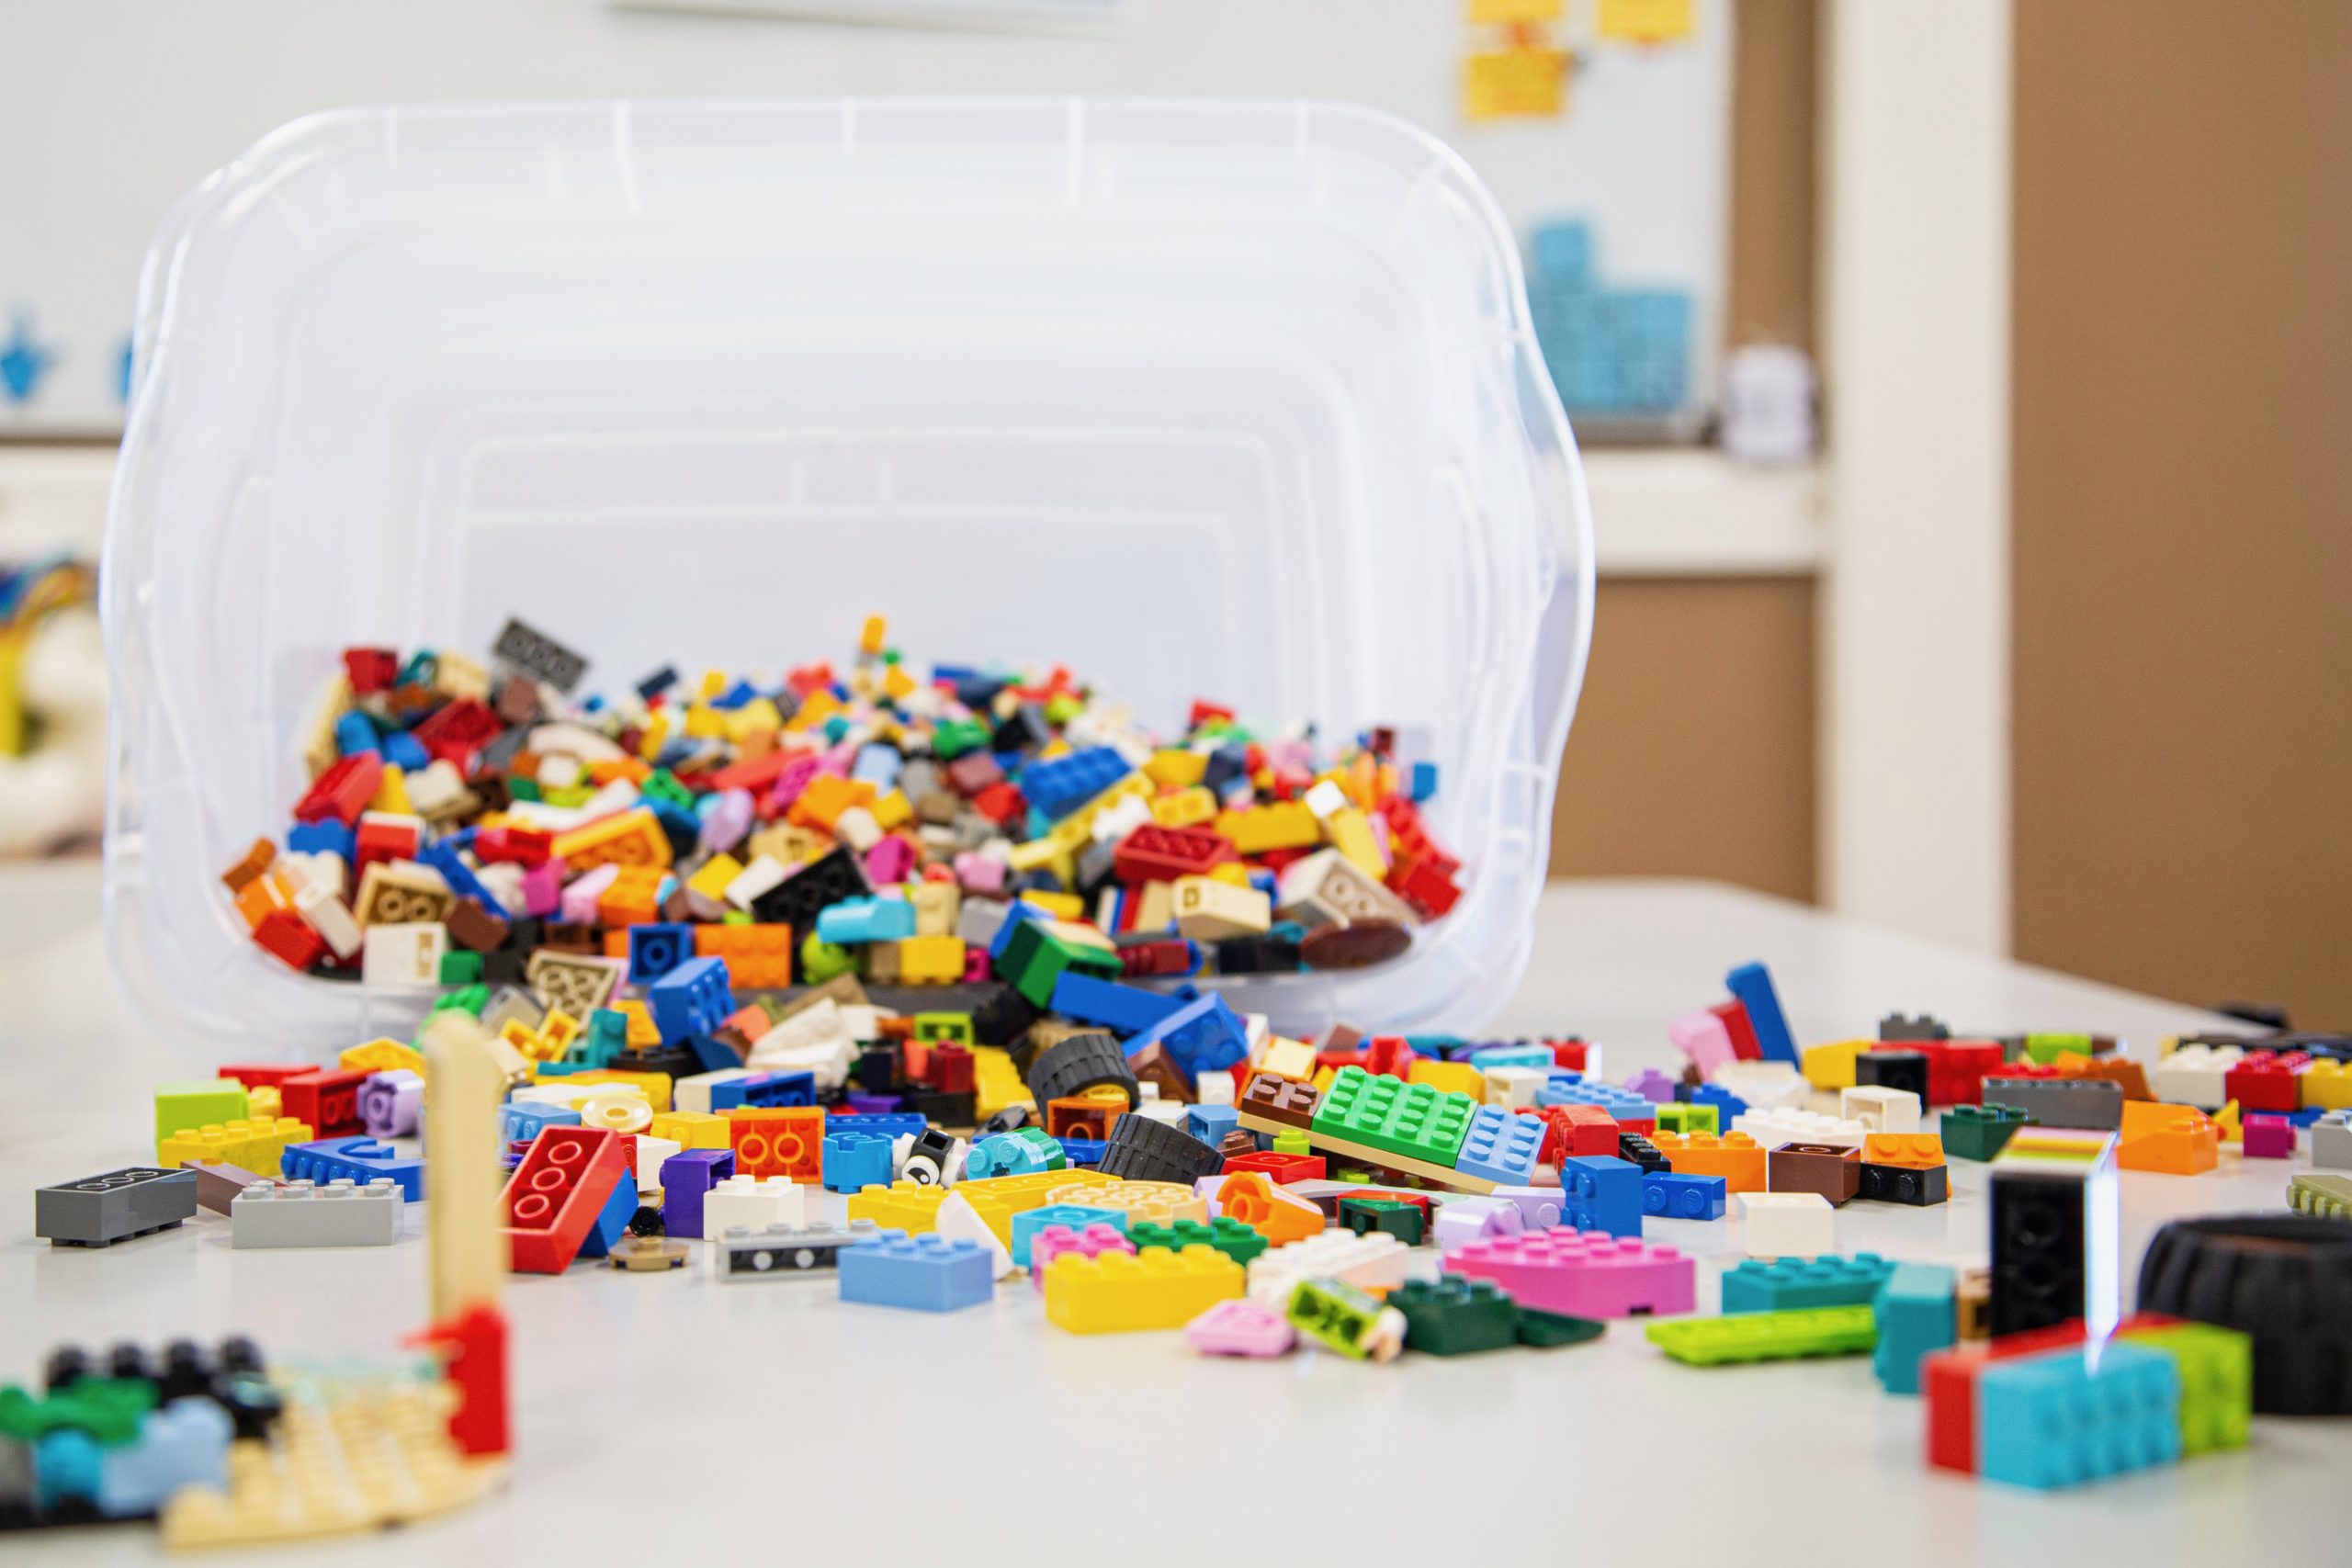 A plastic storage box is tipped over. Lots of Lego bricks are pouring out of the box.